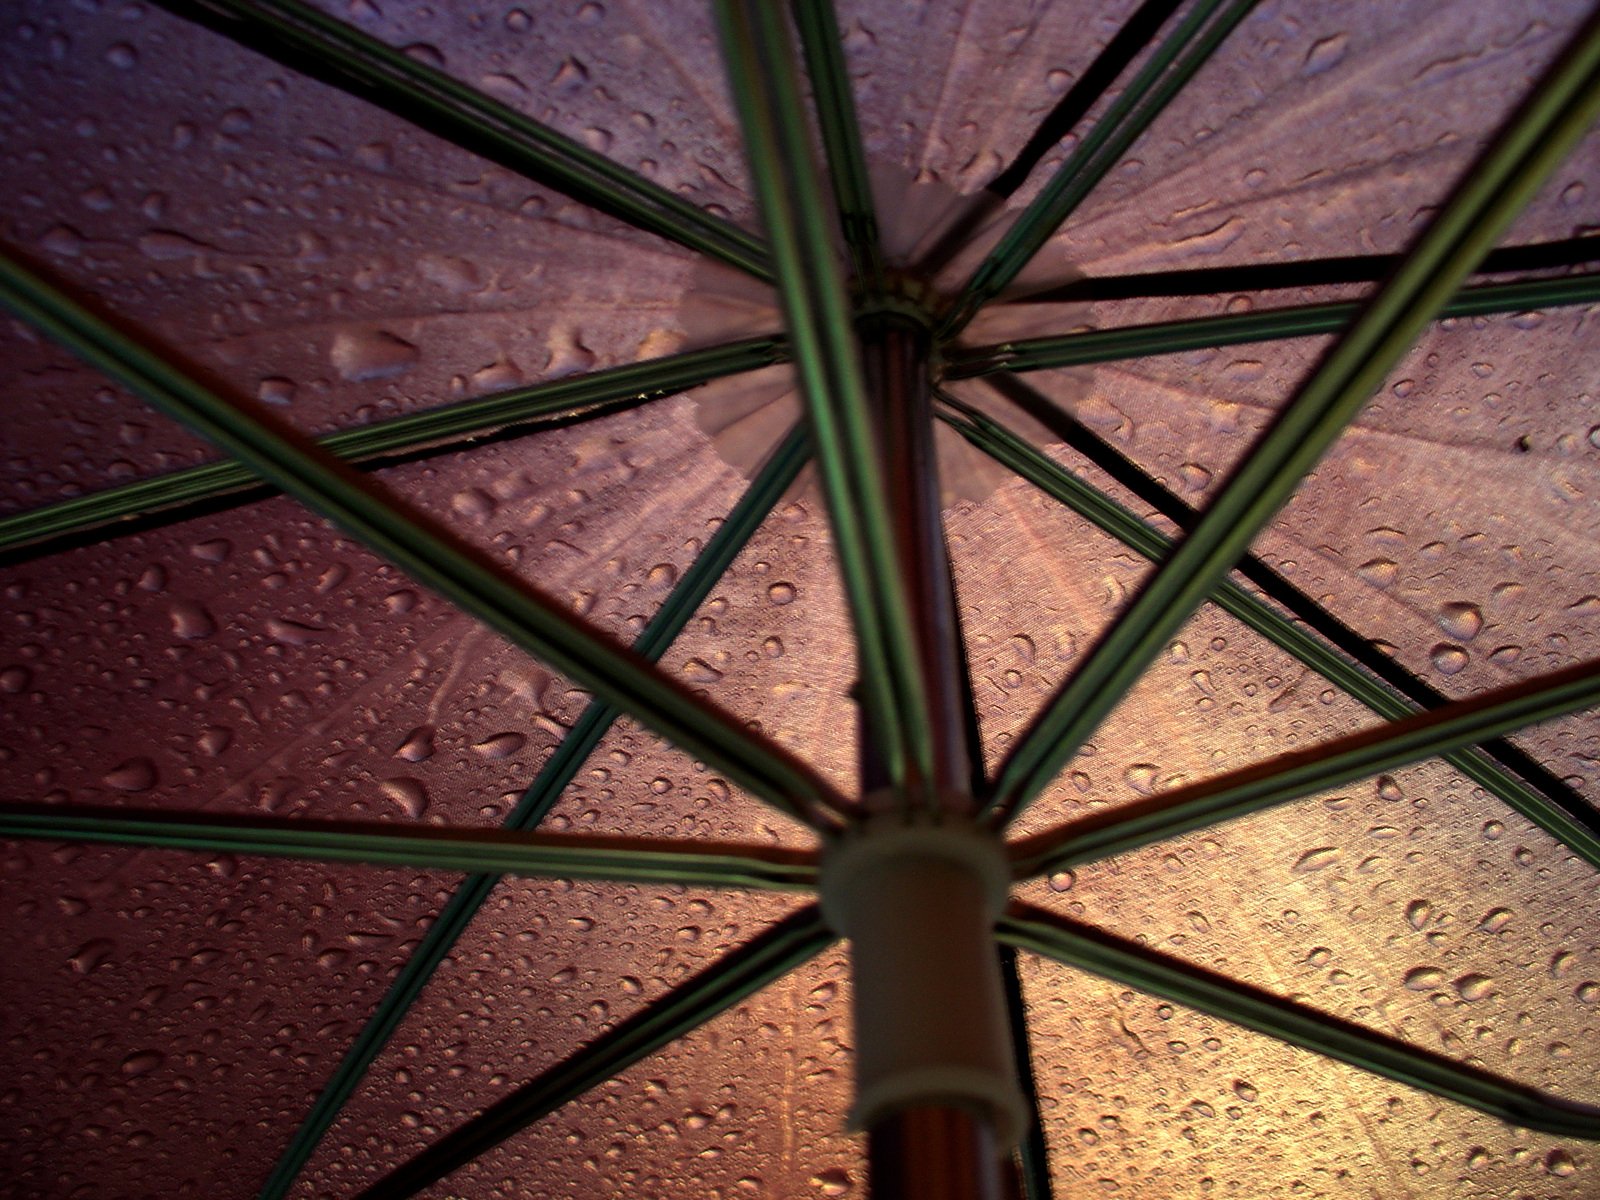 an umbrella with water droplets on it is shown